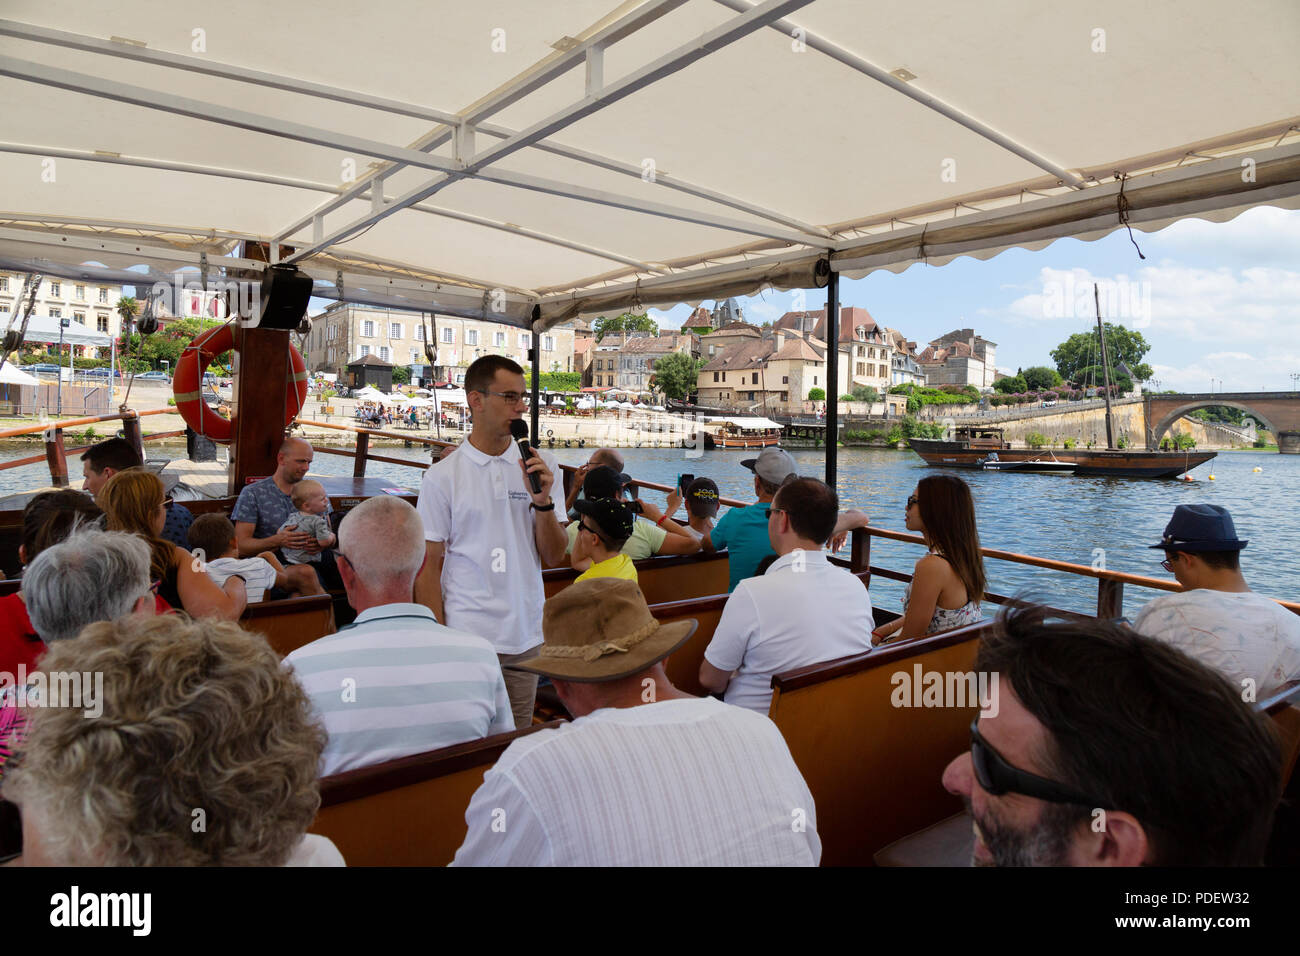 Bergerac tourism - tourists on a boat trip on a traditional Gabarre, Dordogne River at Bergerac, Dordogne France Europe Stock Photo